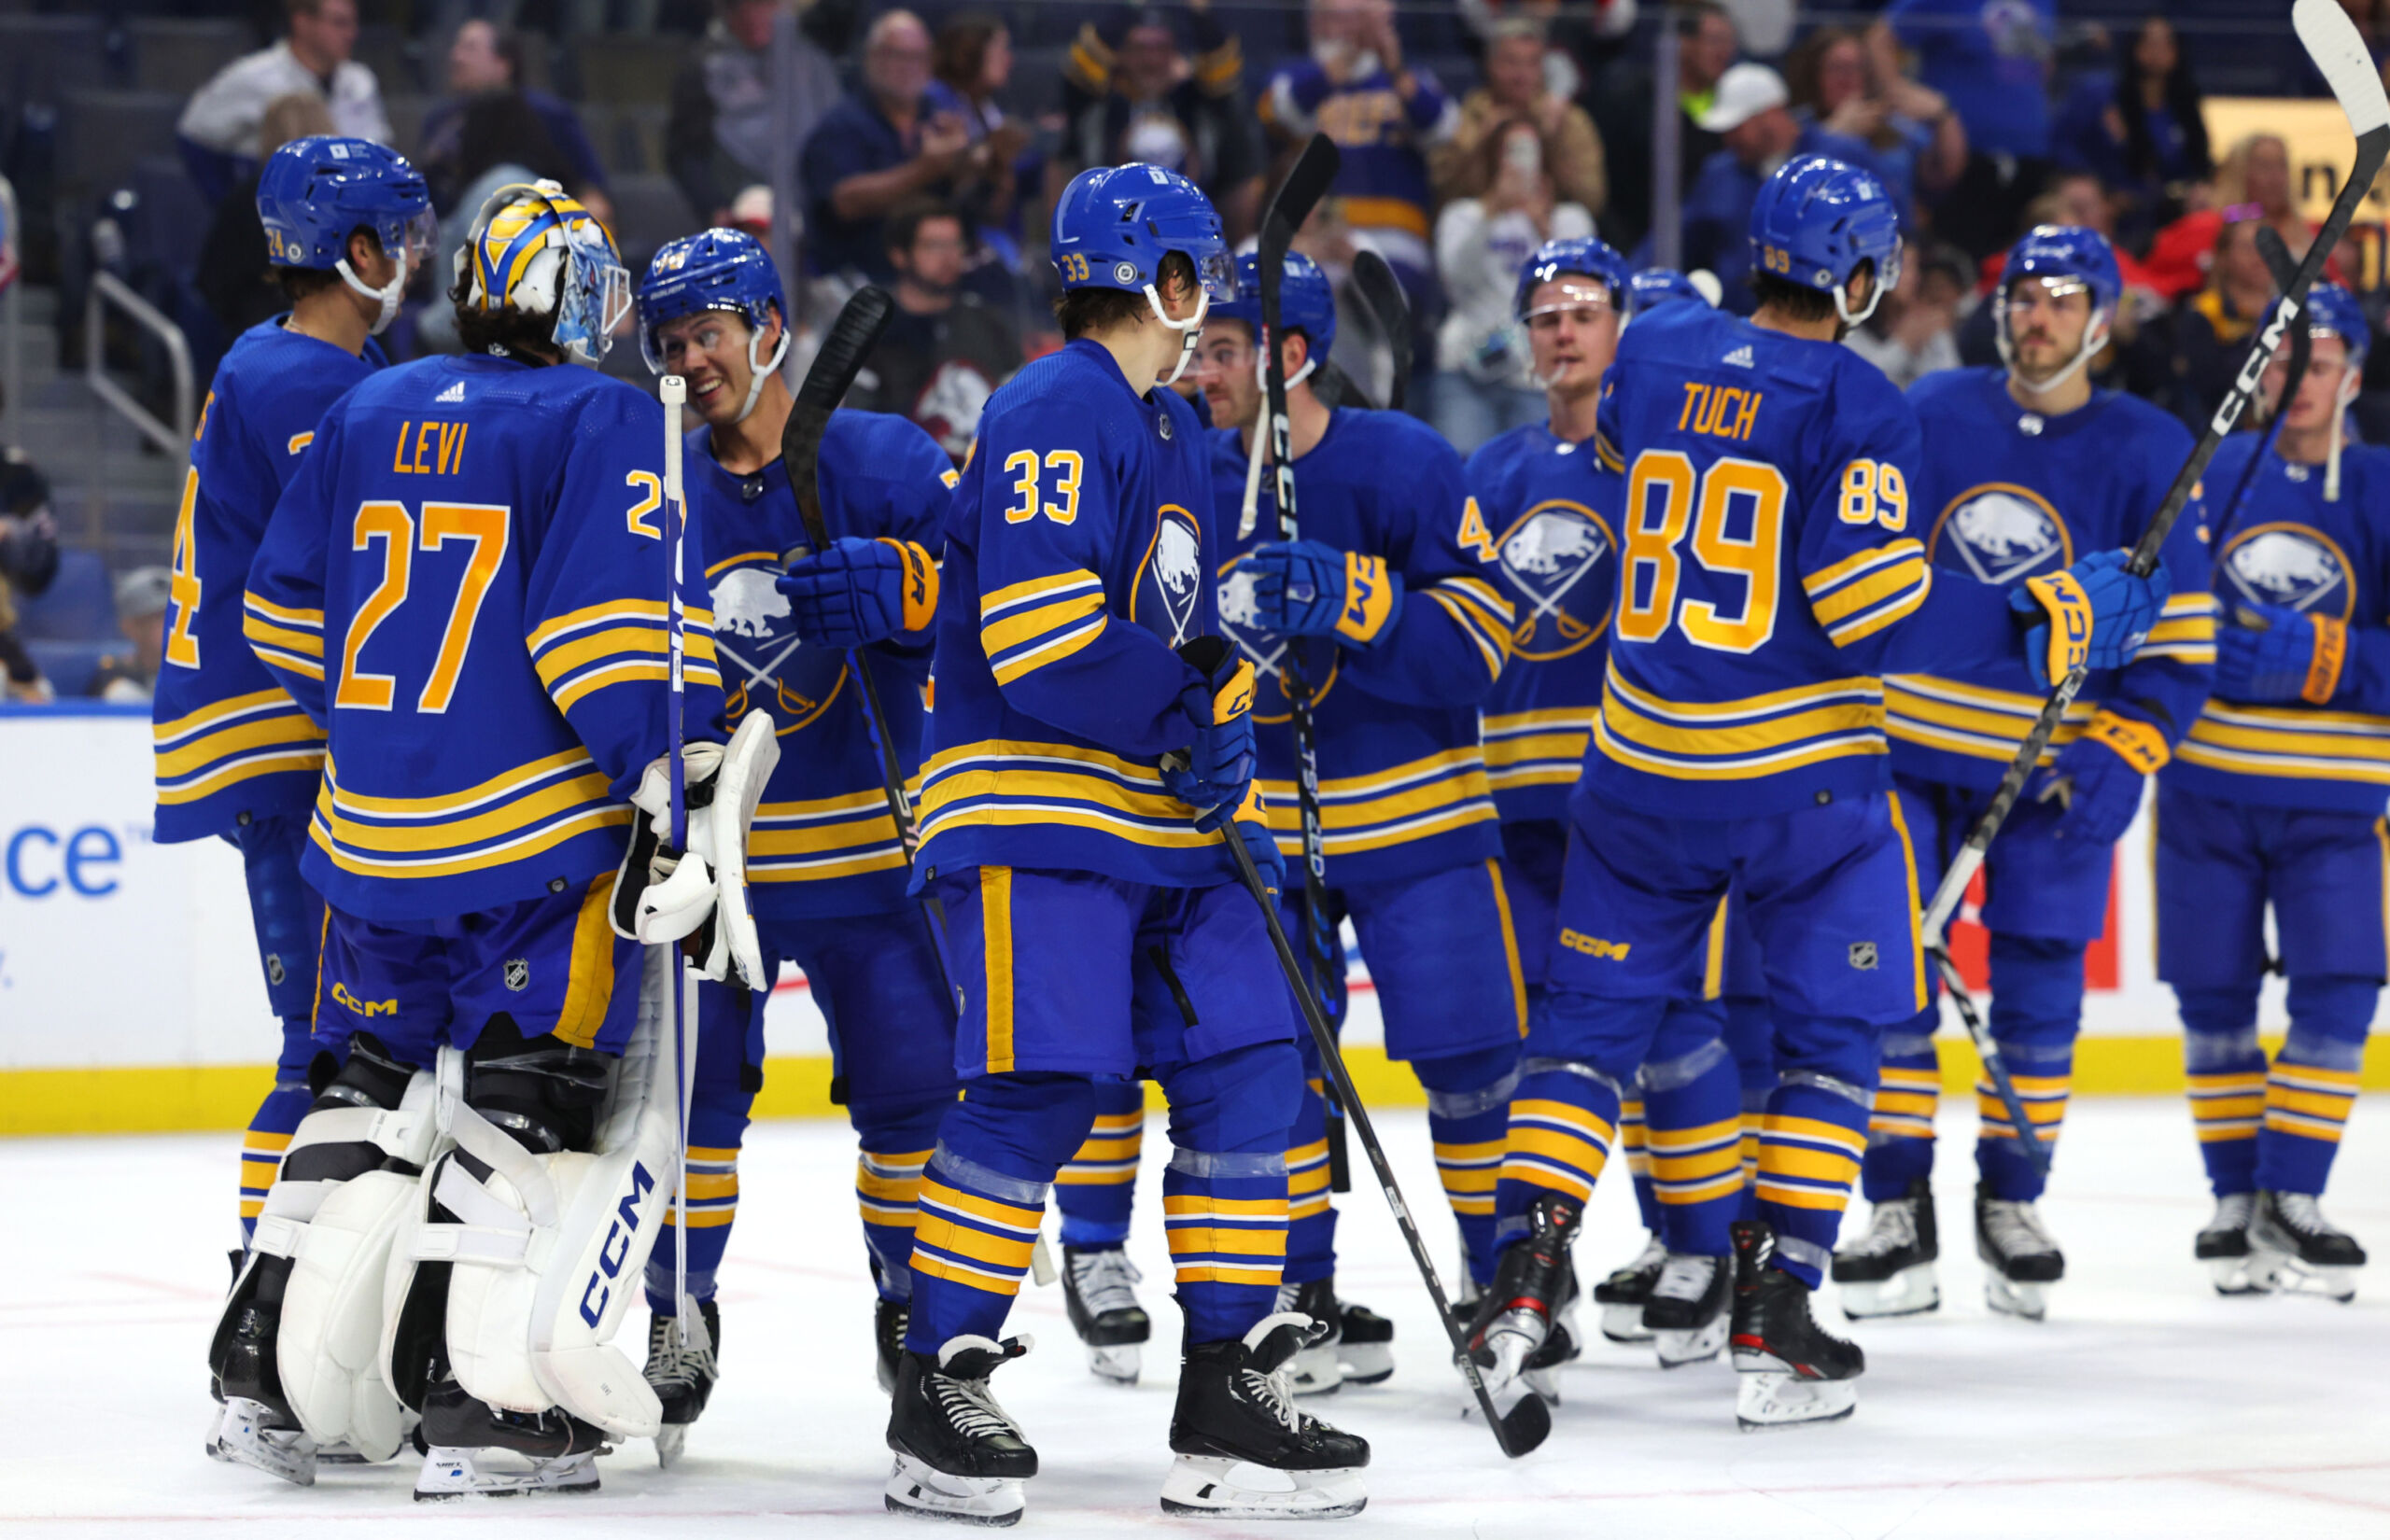 Buffalo Sabres 2023-24 season preview: Playoff chances, projected points,  roster rankings - The Athletic